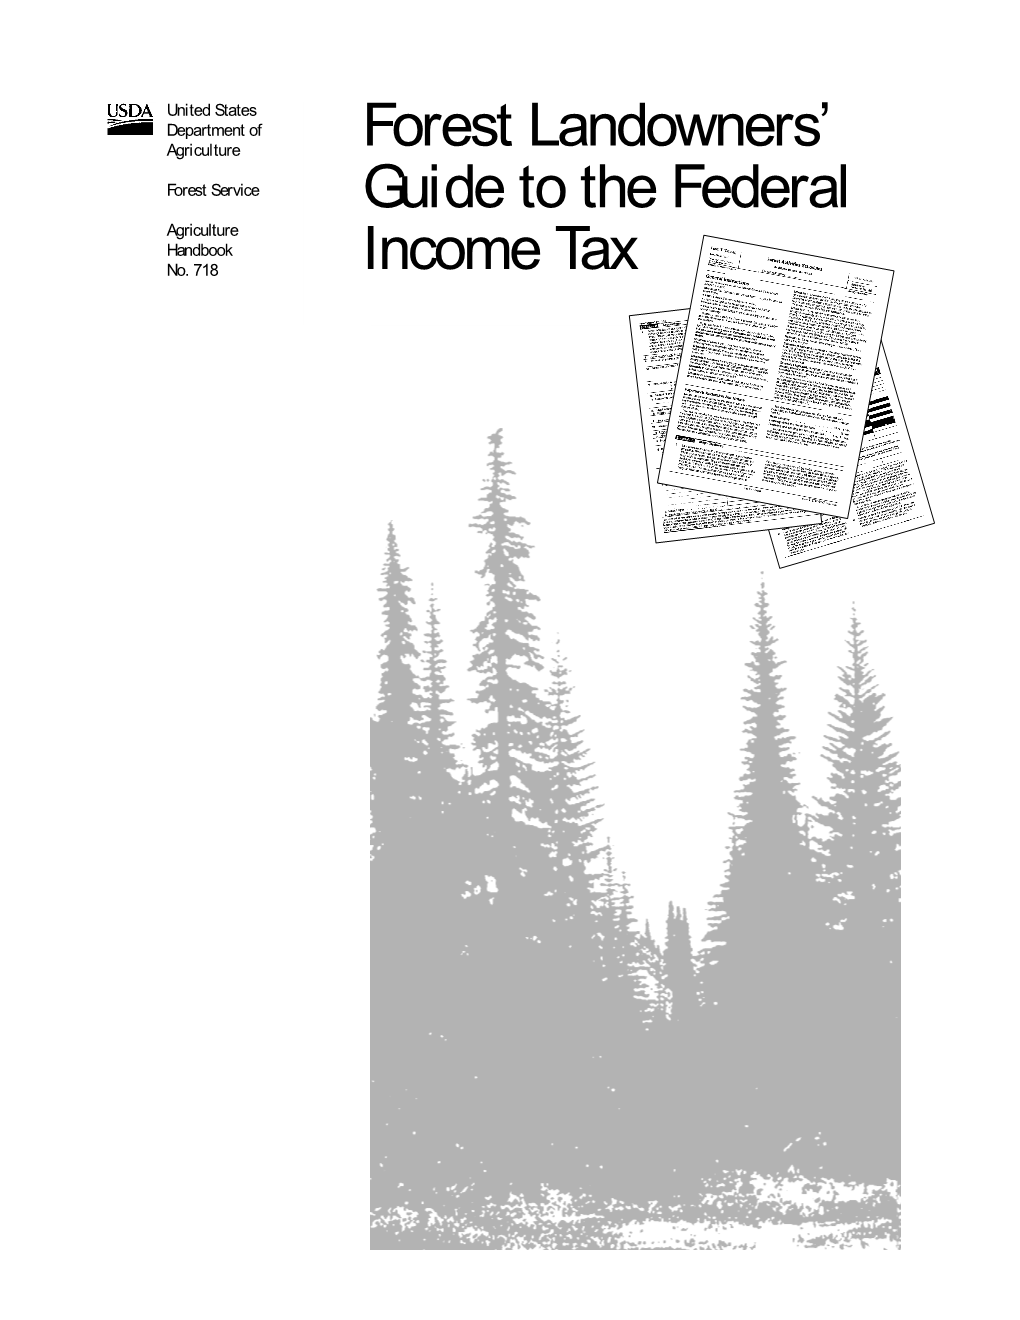 Forest Landowners' Guide to the Federal Income